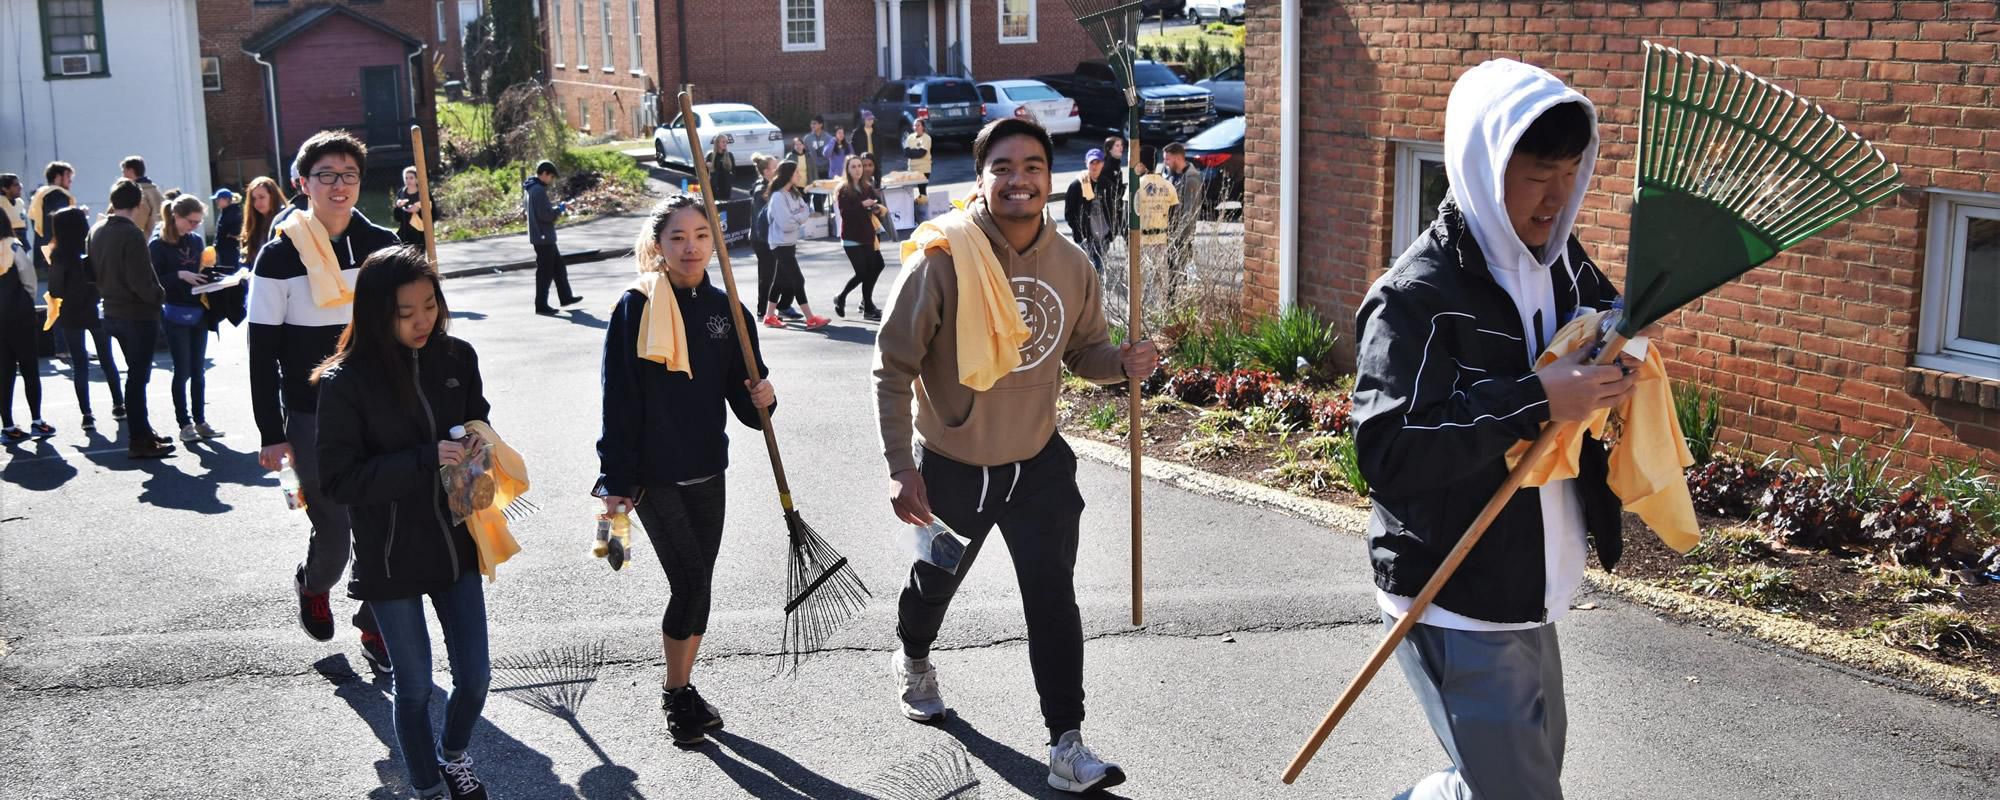 banner image 4 students walking with rakes